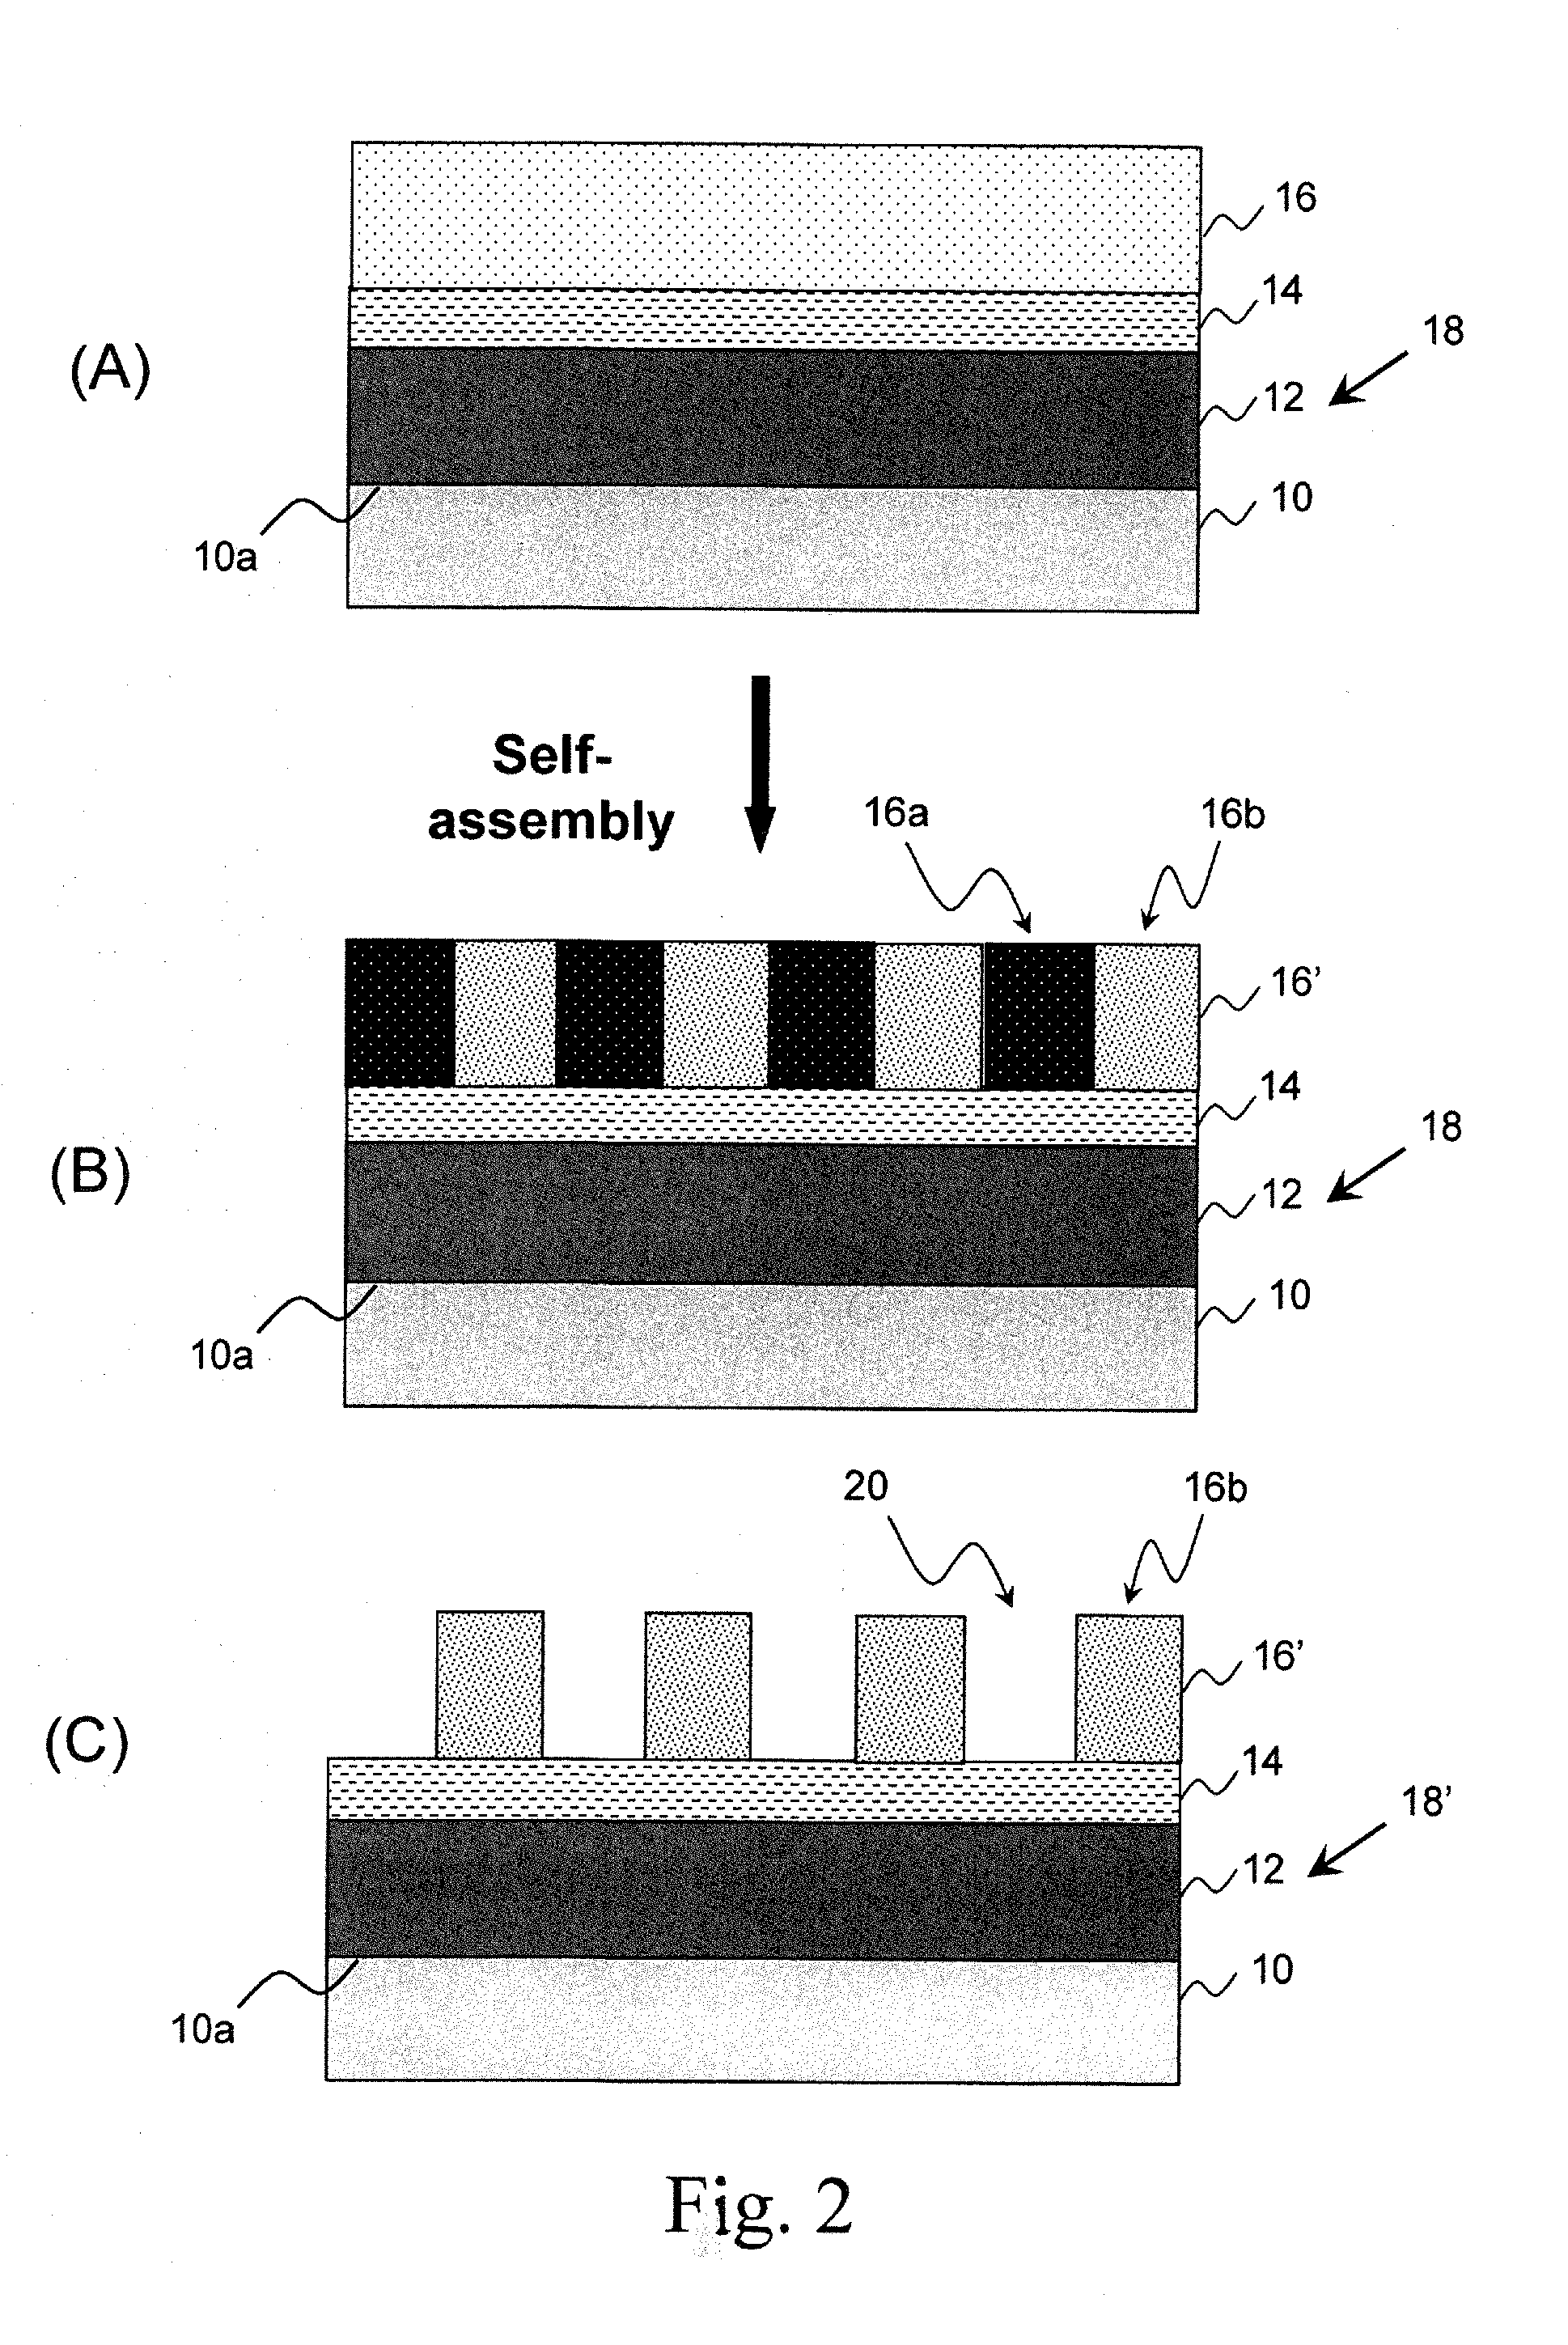 Silicon hardmask layer for directed self-assembly